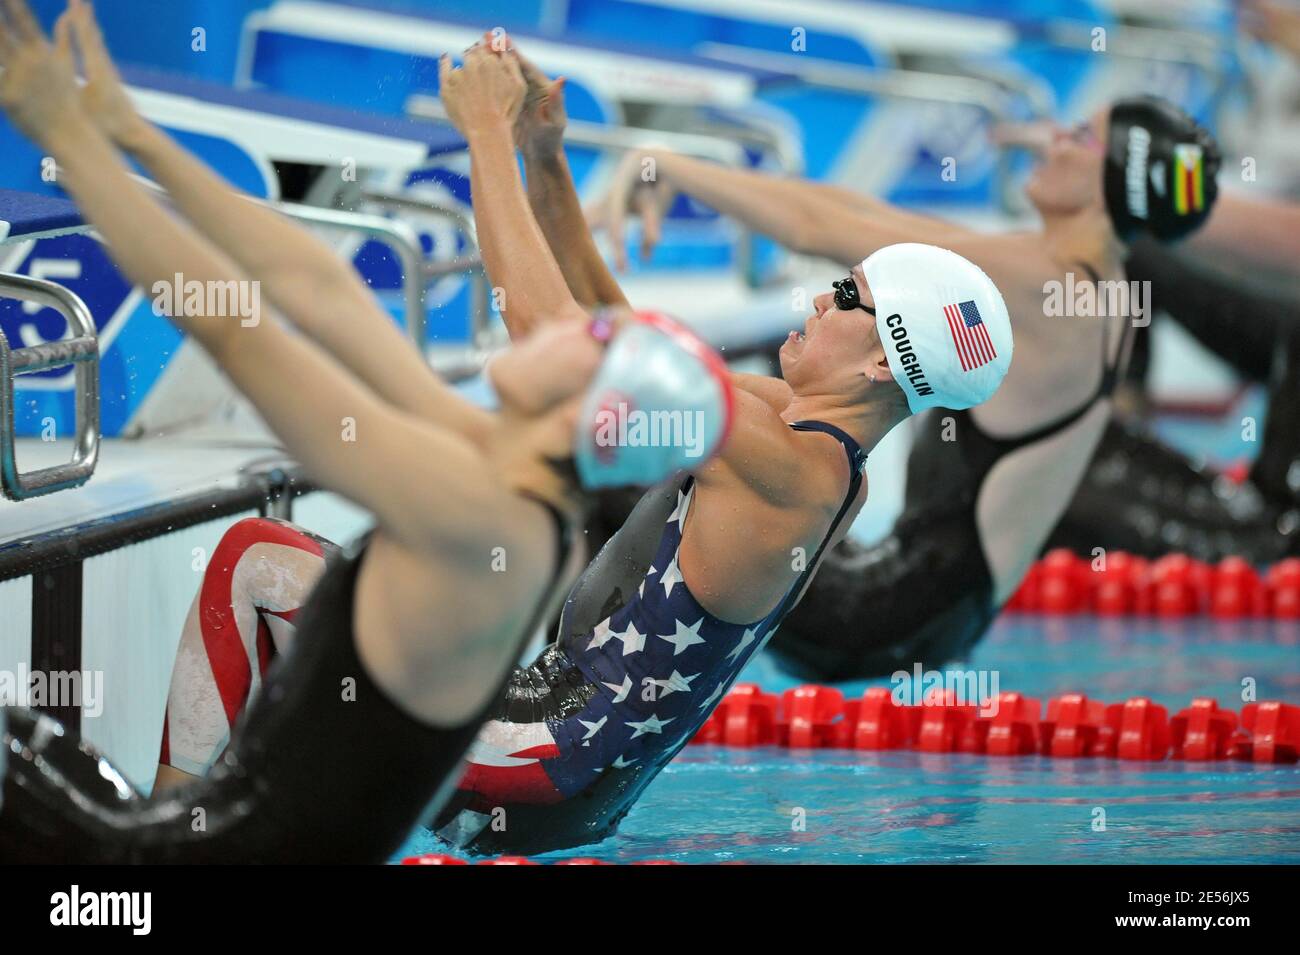 USA's Natalie Coughlin competes on women's 100 meters backstroke during the Swimming preliminary swimming qualification at the XXIX Olympic Games in Beijing, China on August 9, 2008. Photo by Gouhier-Hahn-Nebinger/Cameleon/ABACAPRESS.COM Stock Photo